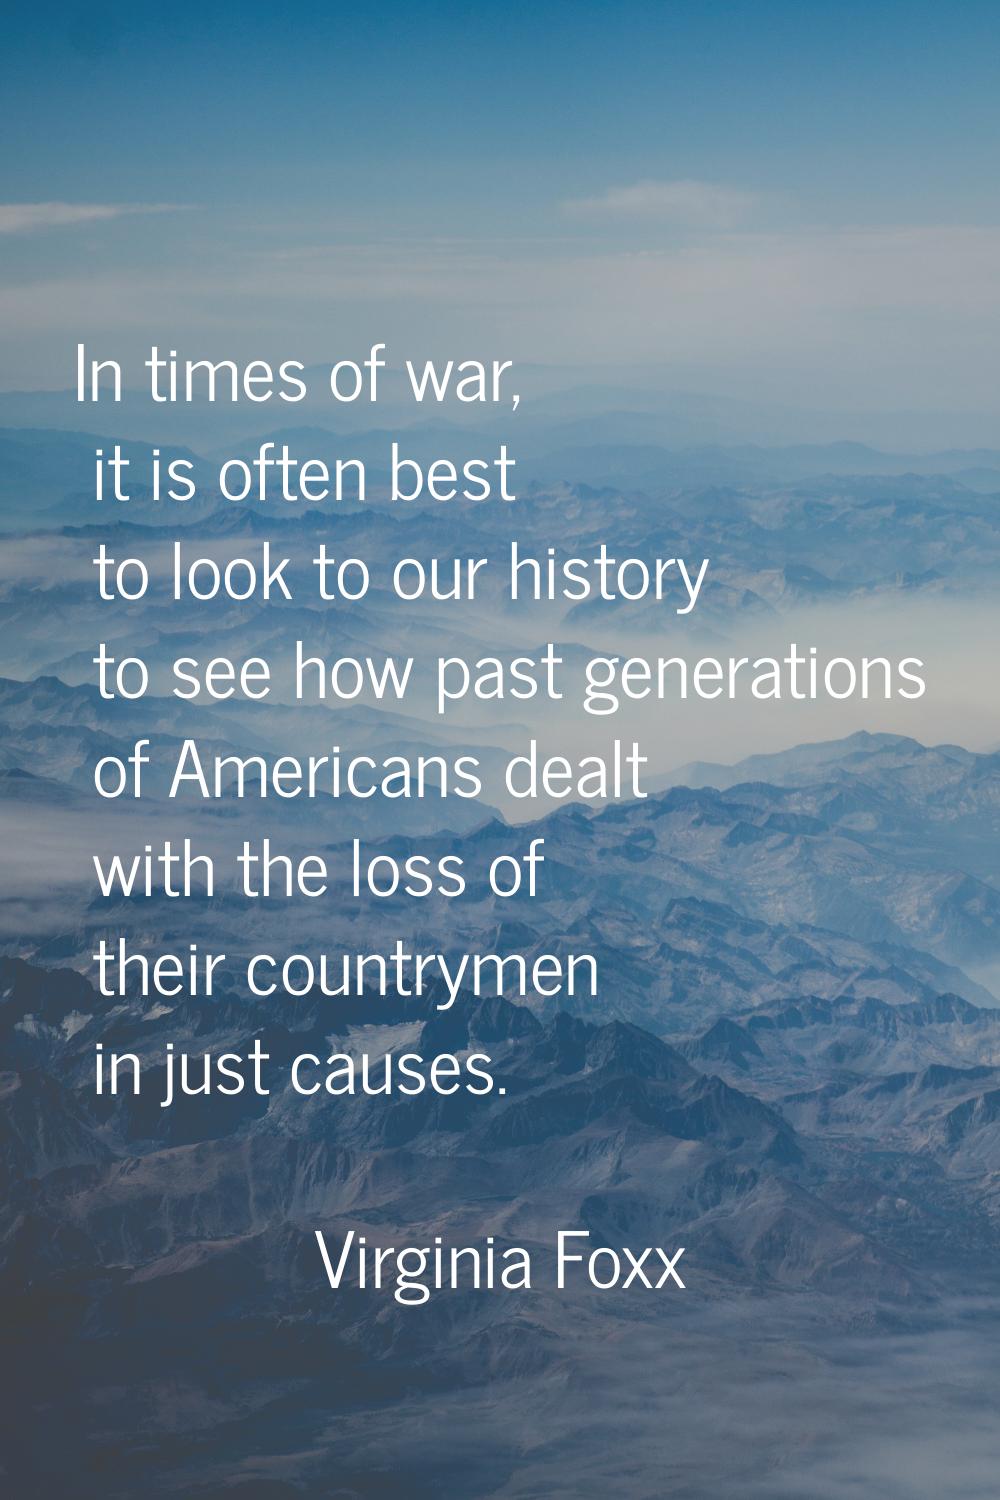 In times of war, it is often best to look to our history to see how past generations of Americans d